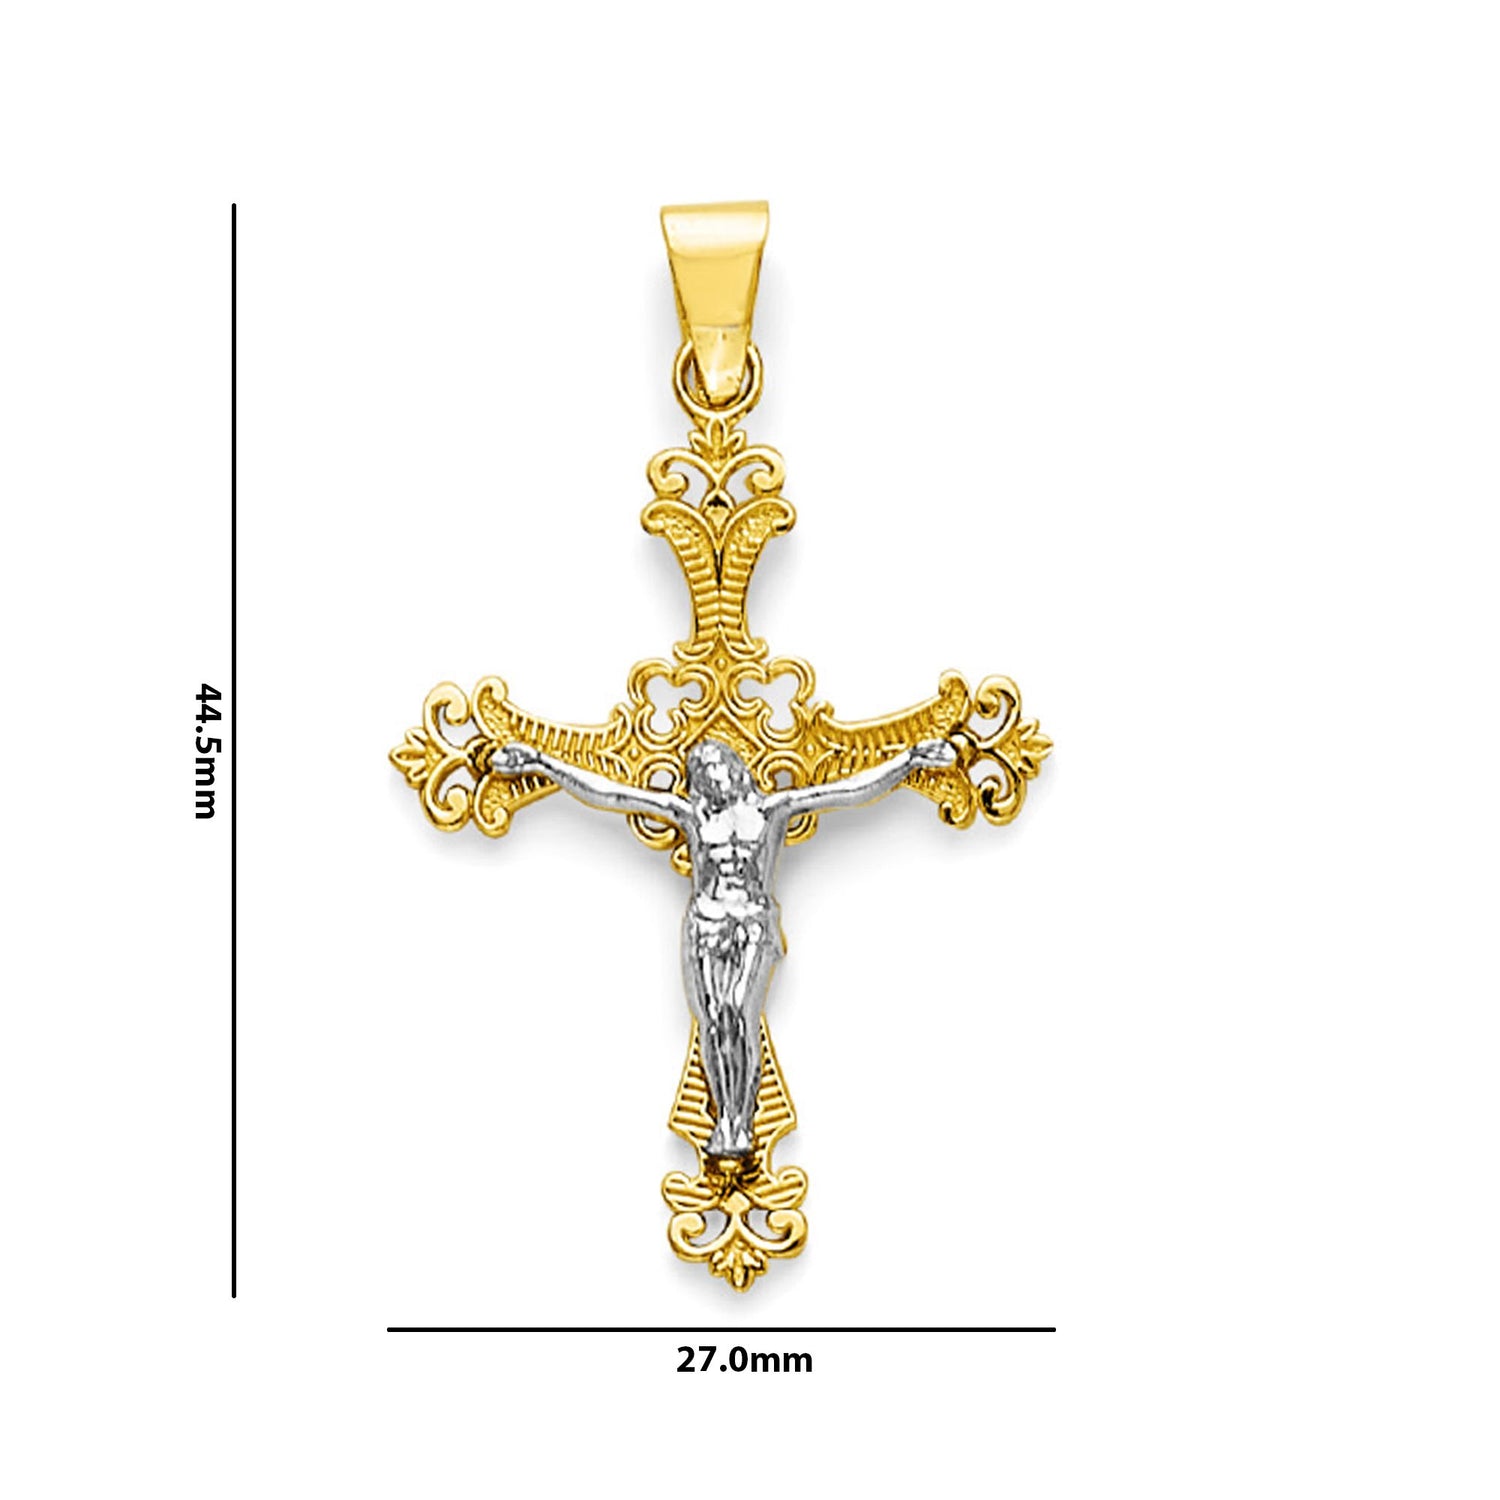 Two Tone Gold Filigree Patonce Crucifix Cross Pendant with Measurement